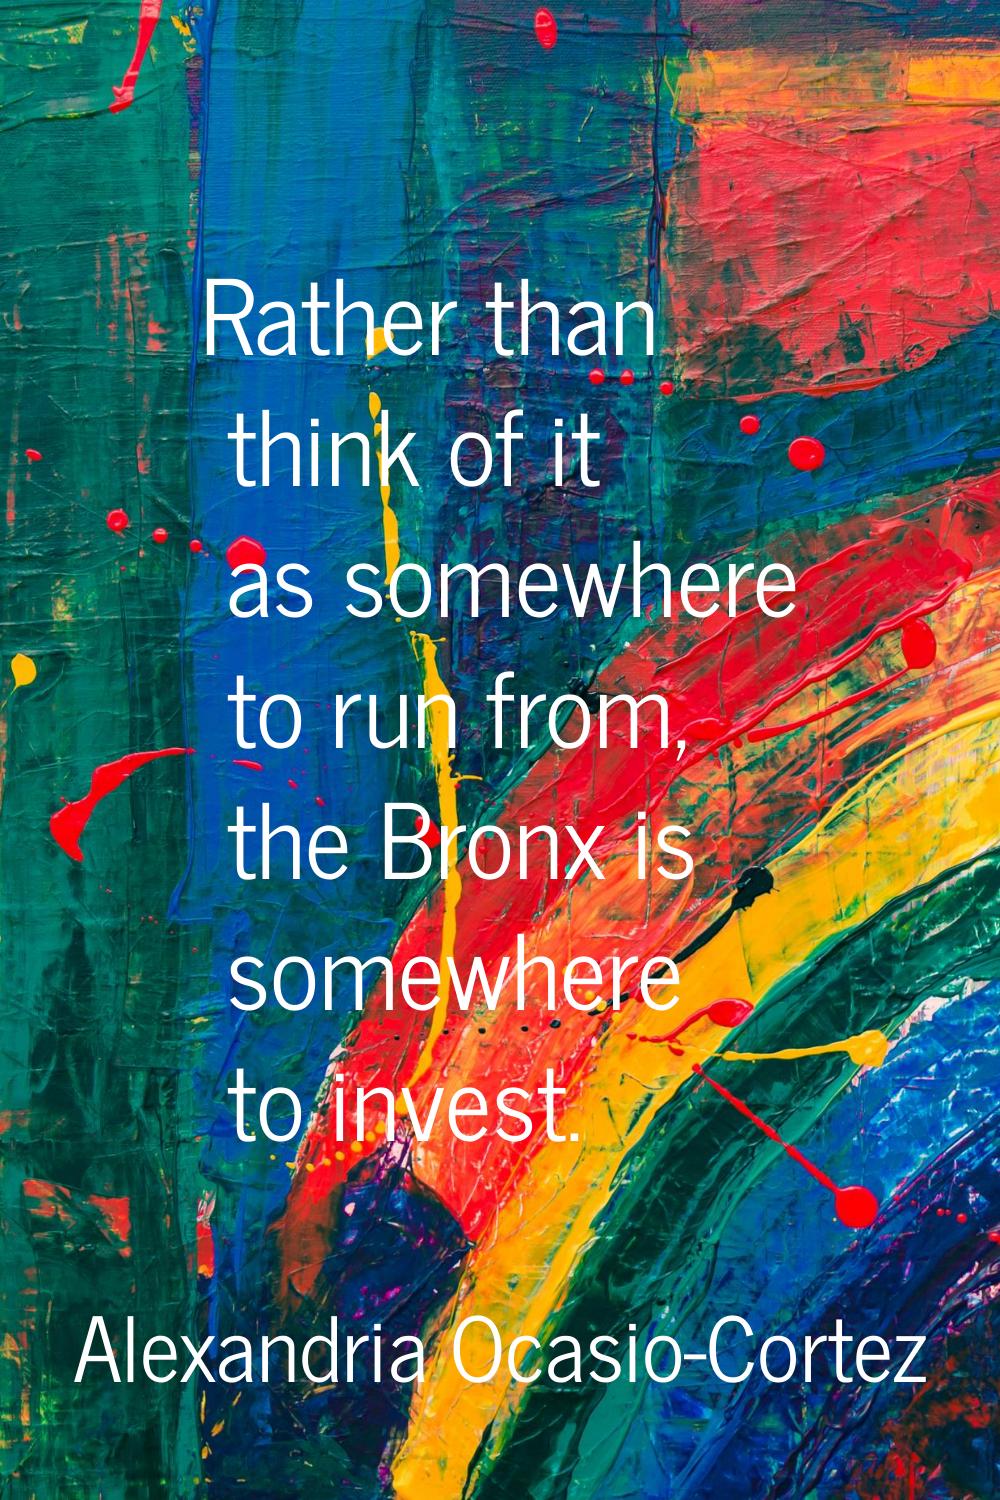 Rather than think of it as somewhere to run from, the Bronx is somewhere to invest.